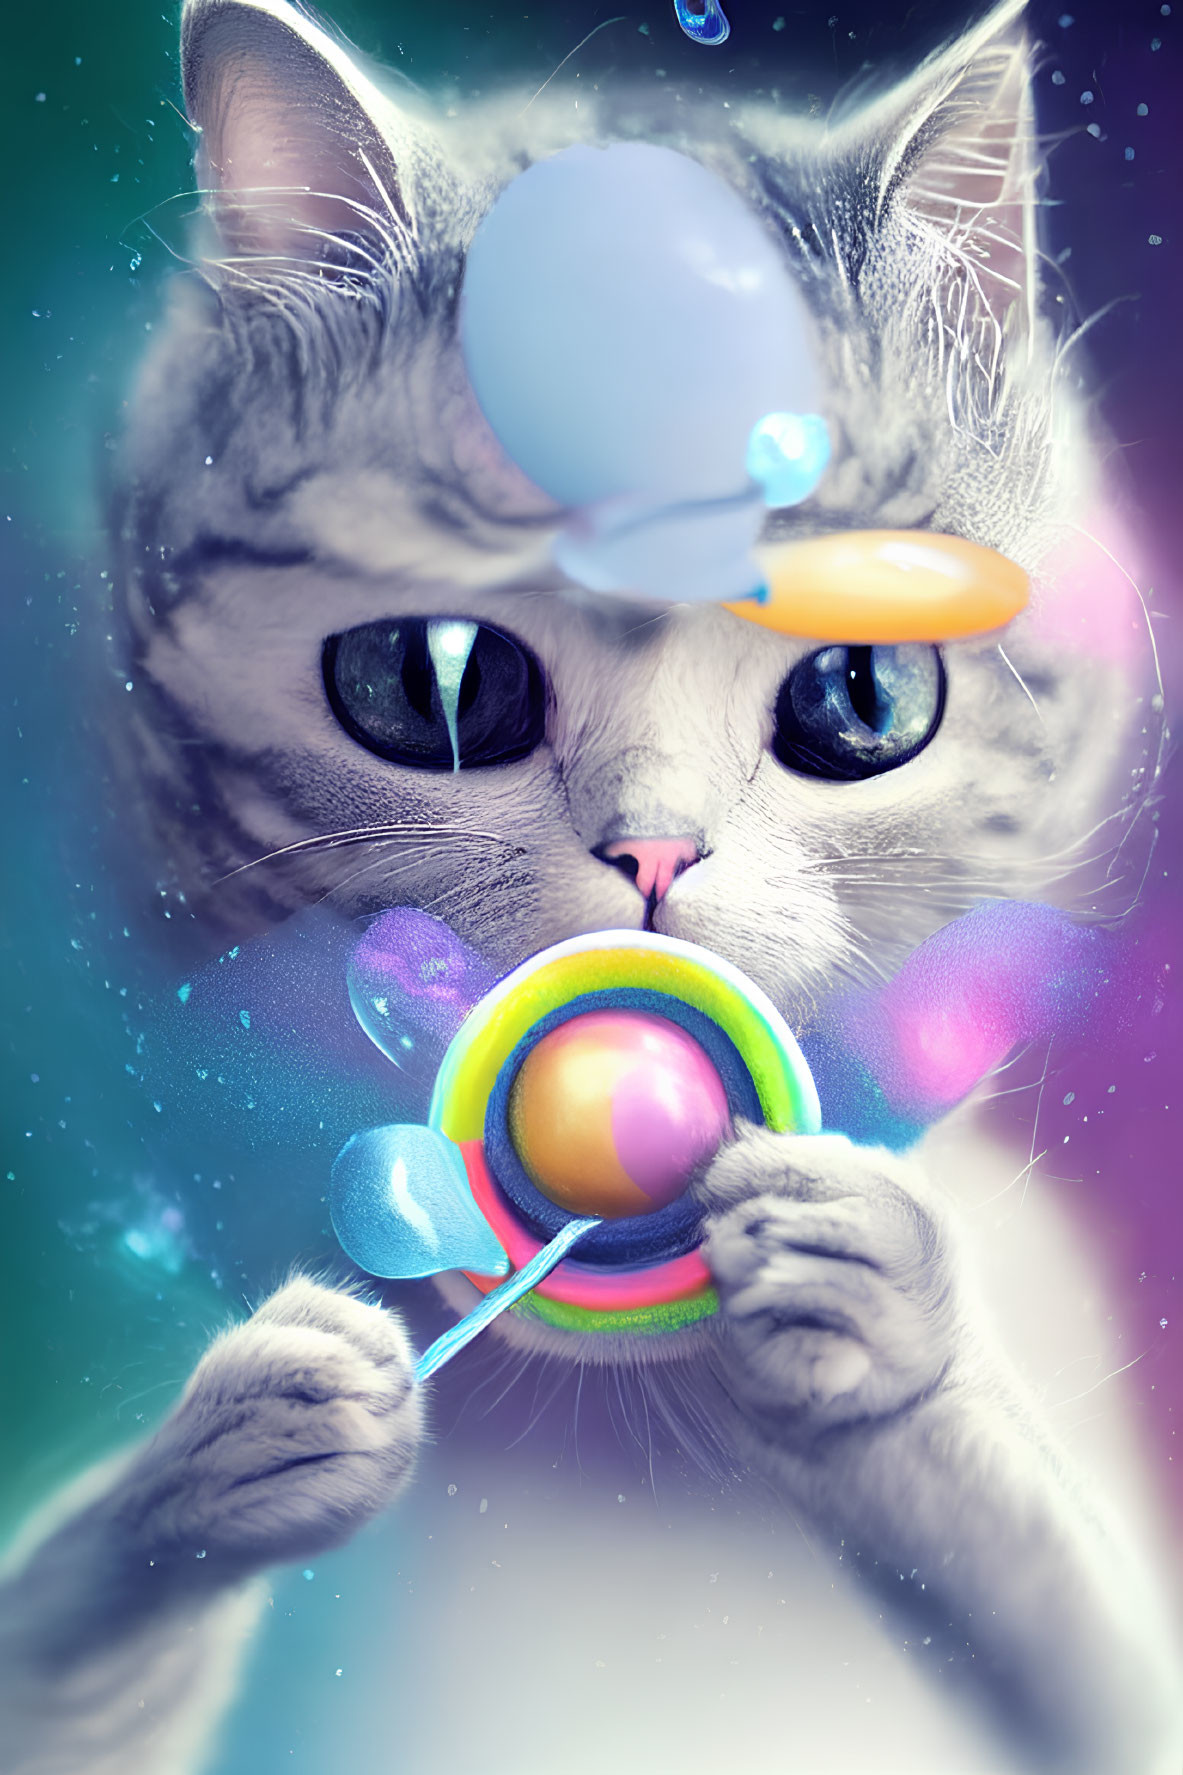 Gray Tabby Cat with Blue Eyes Blowing Soap Bubbles